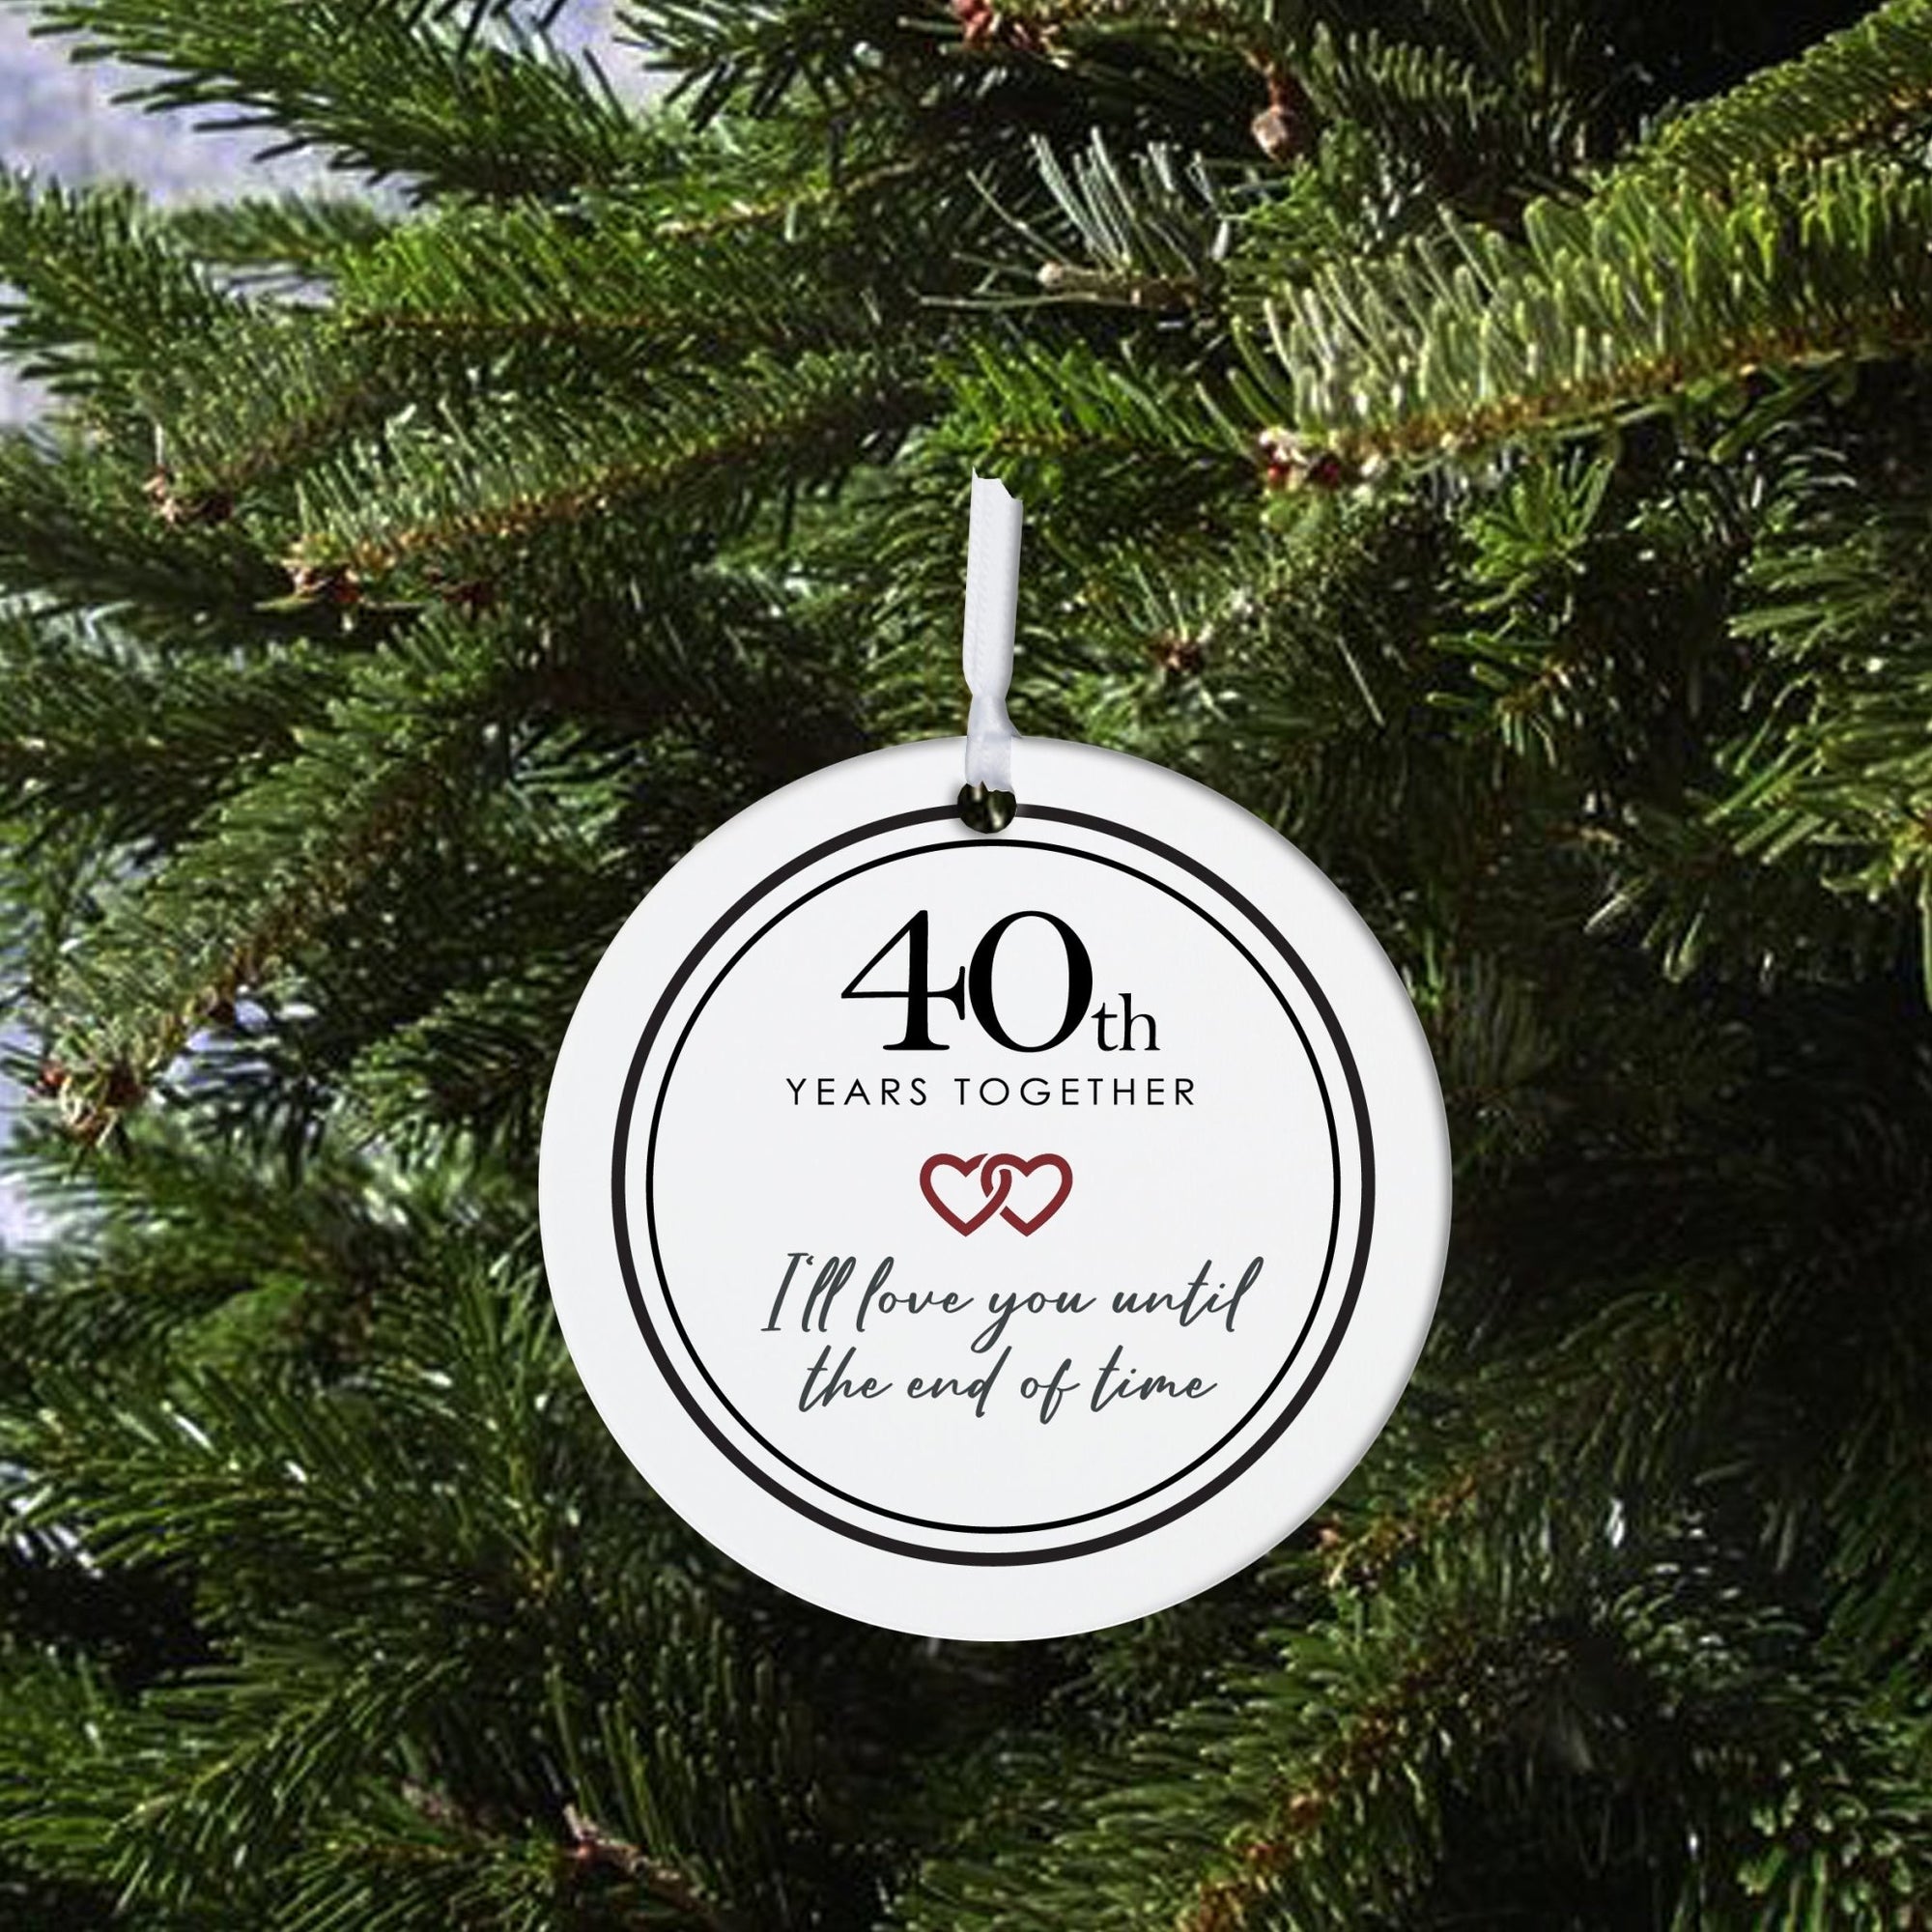 40th Year Together Wedding Anniversary White Ornament With Inspirational Message Gift Ideas - I Love You Till The End Of Time - LifeSong Milestones